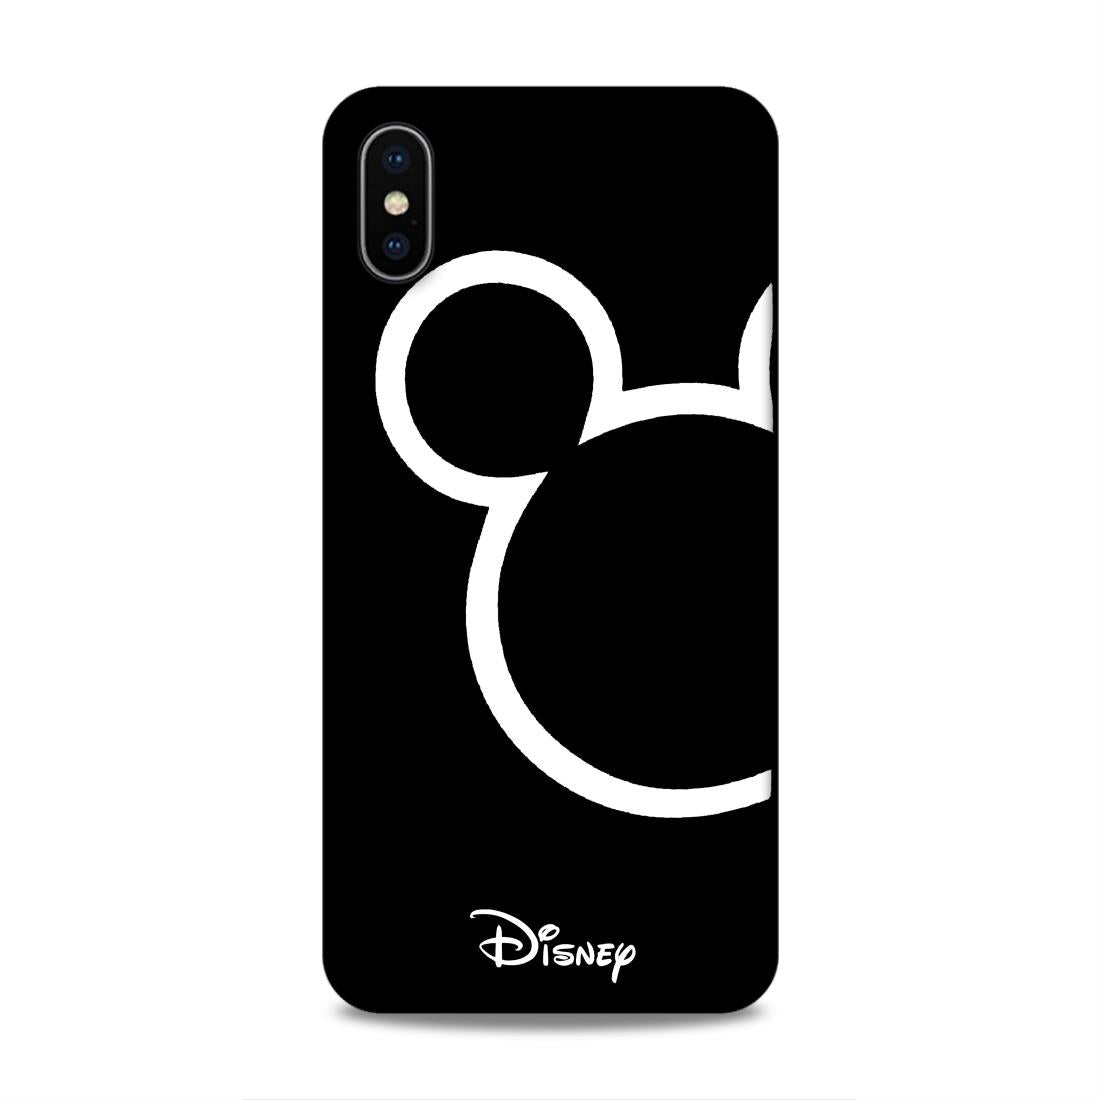 Disney Hard Back Case For Apple iPhone XS Max